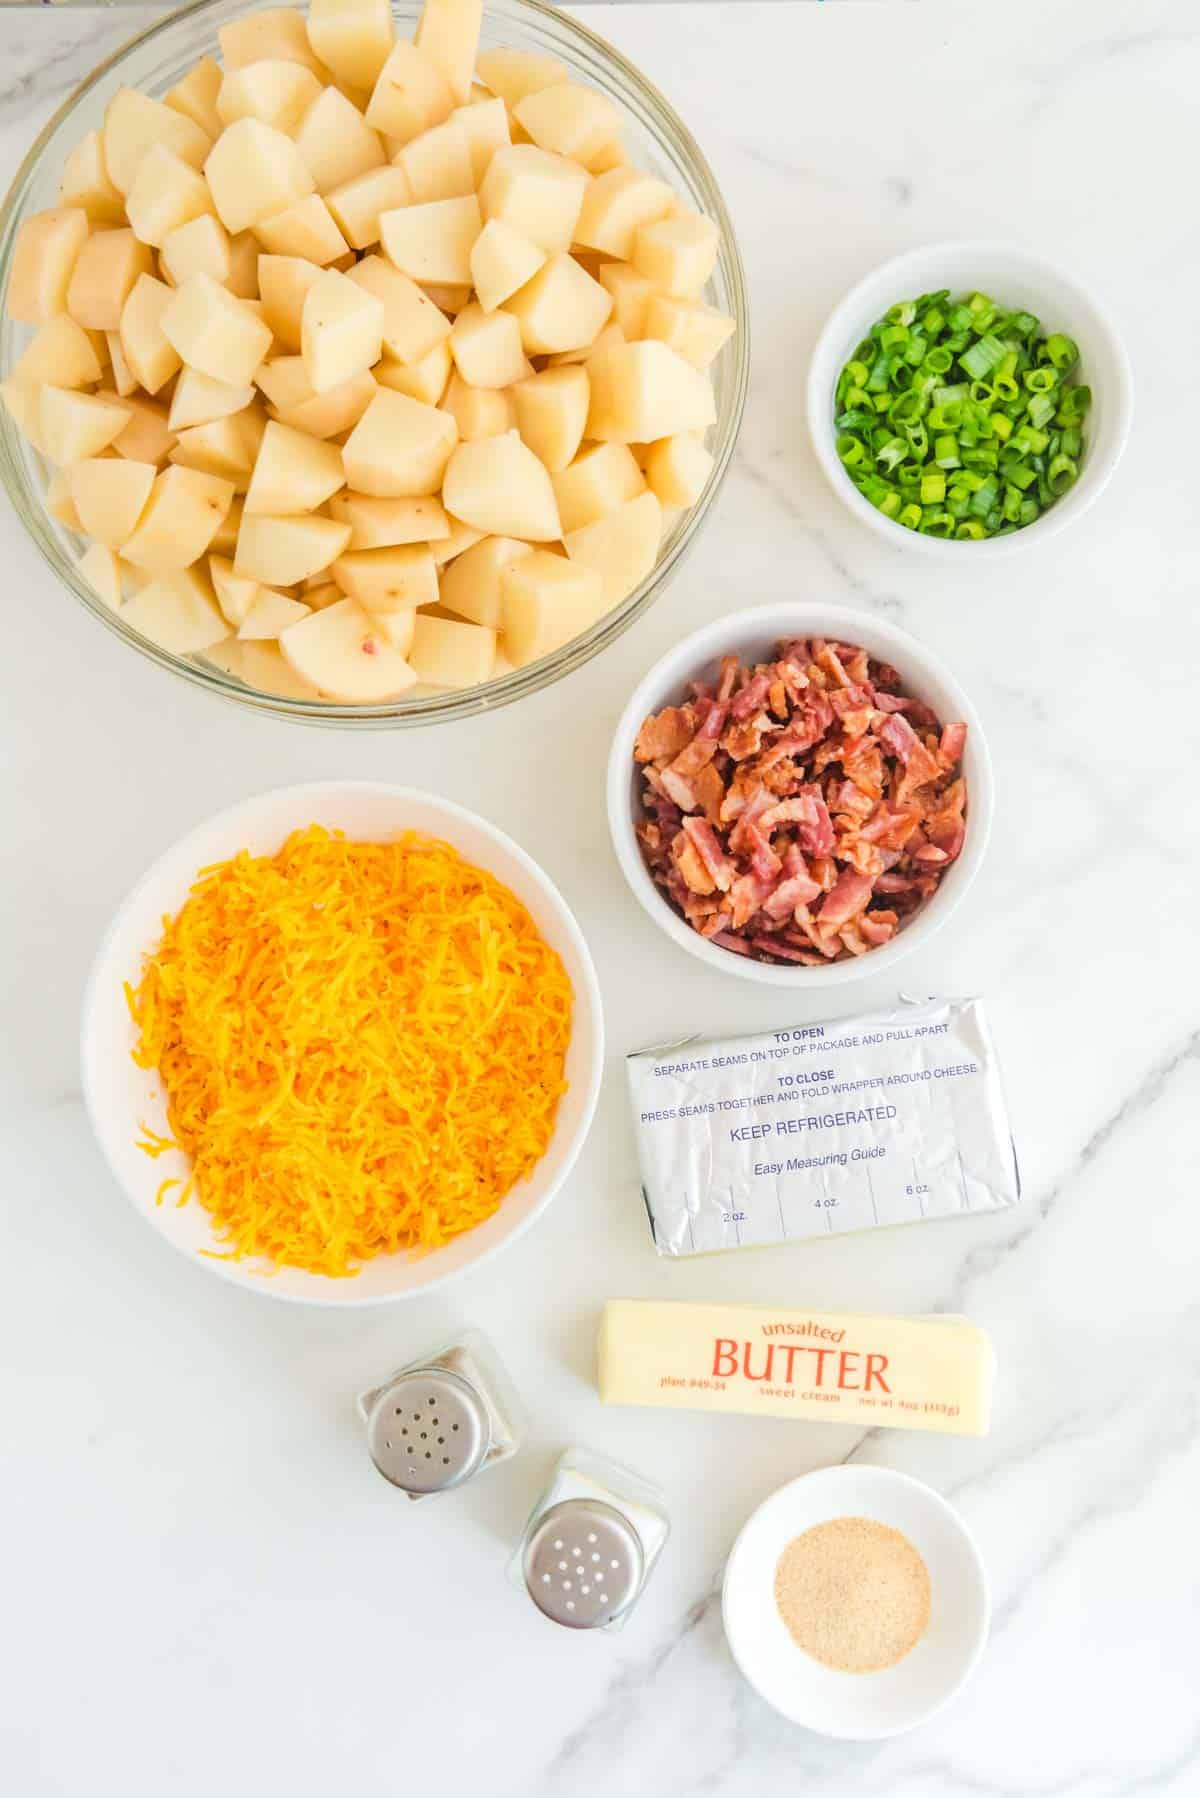 The ingredients for loaded mashed potatoes are laid out on a marble countertop.